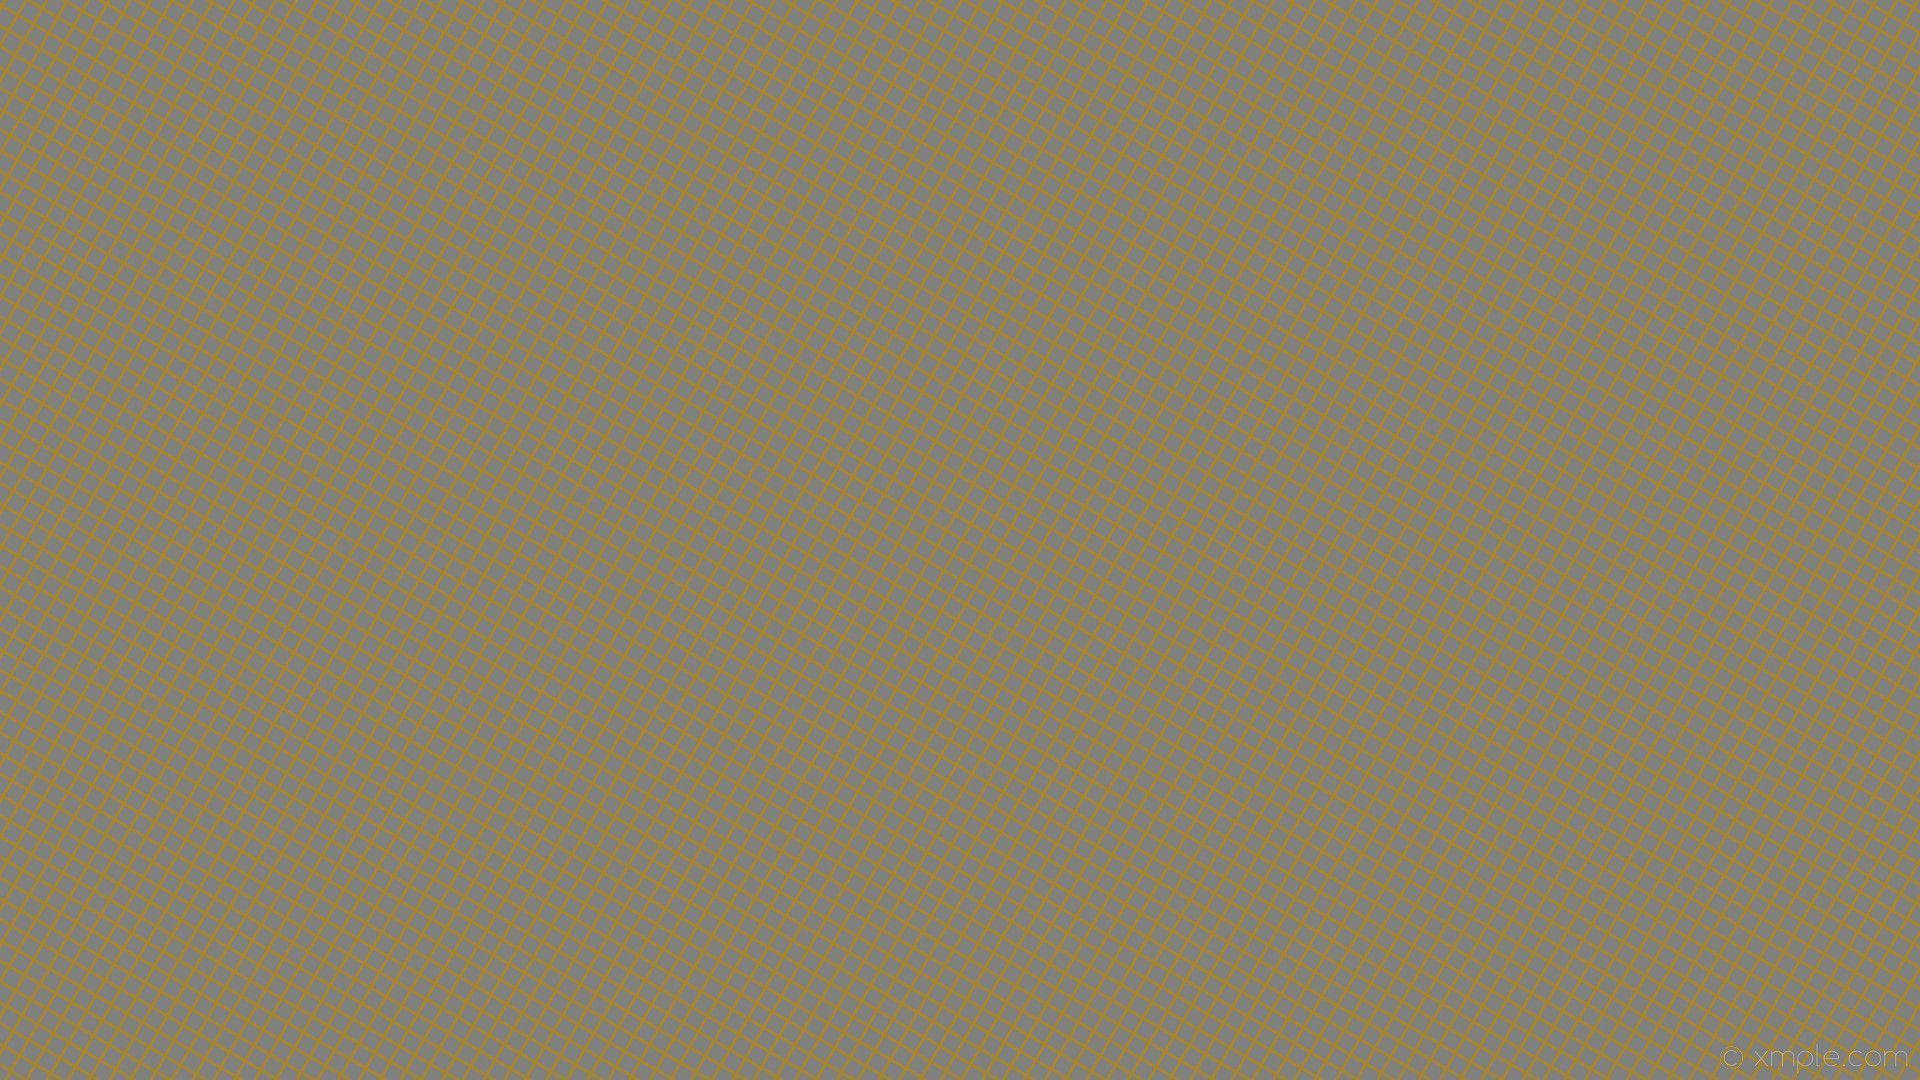 1920X1080 Beige Brown Aesthetic Wallpaper and Background